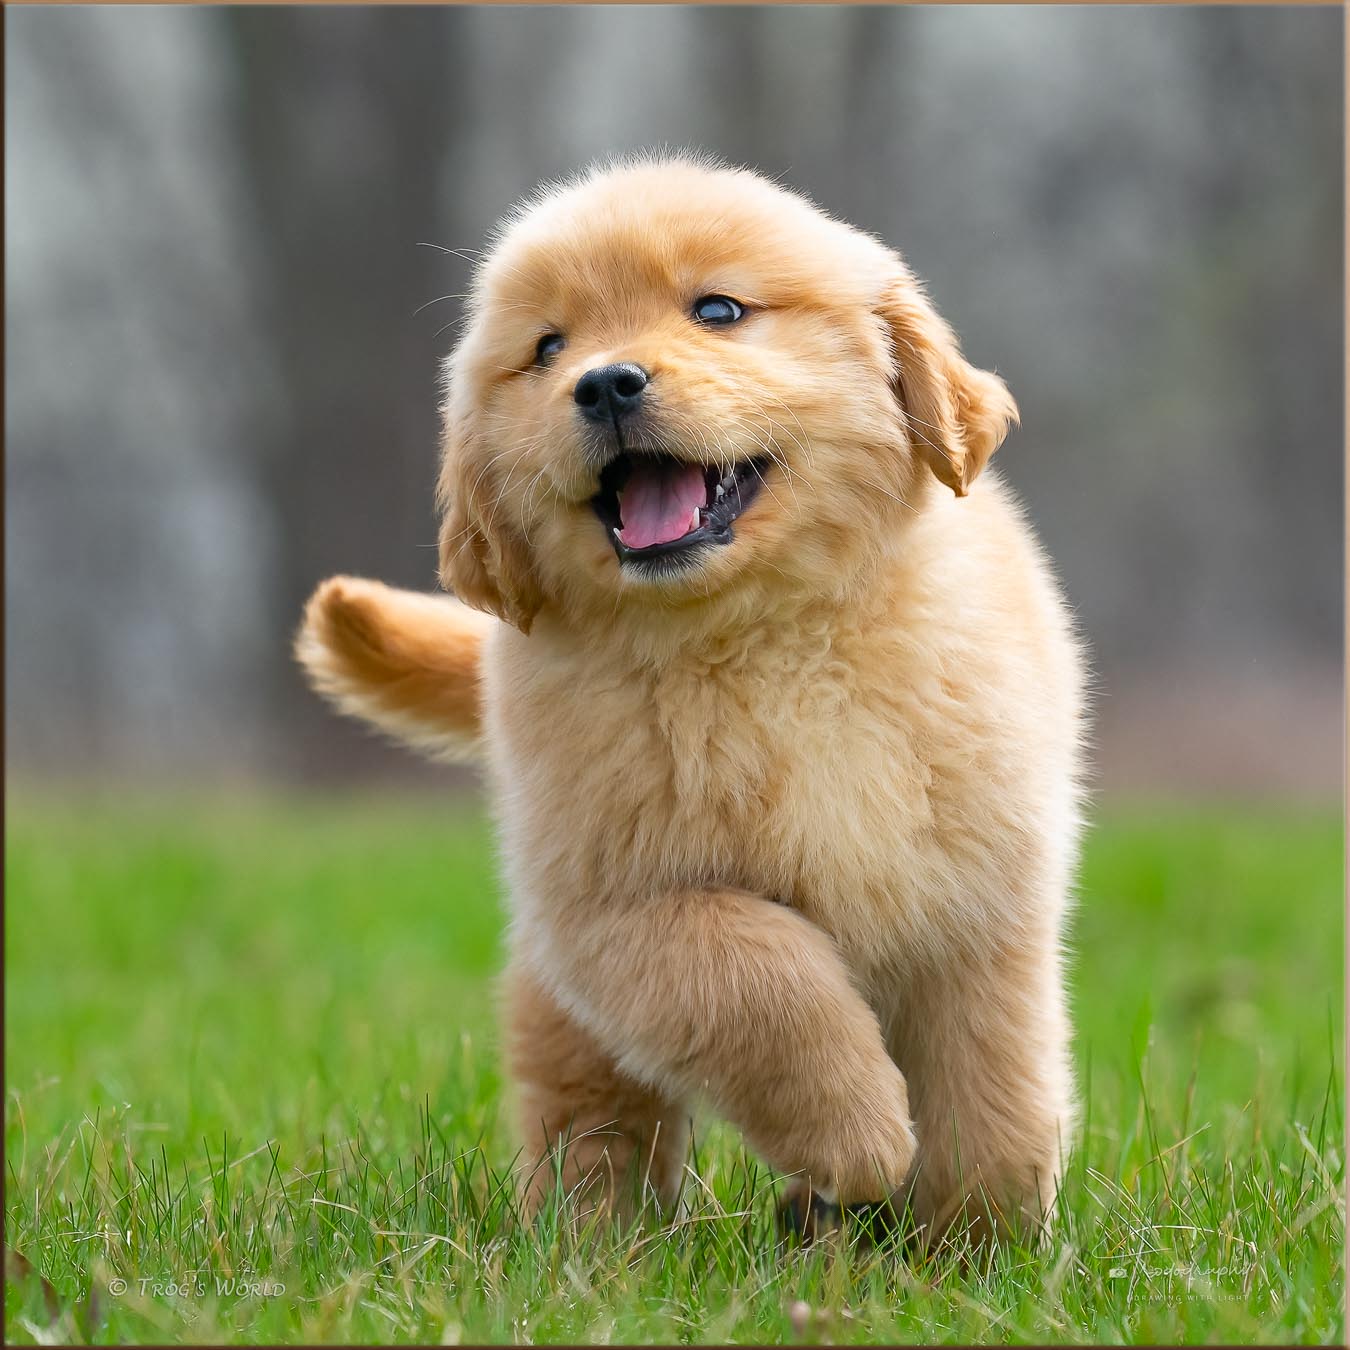 Golden Retriever puppy running and smiling